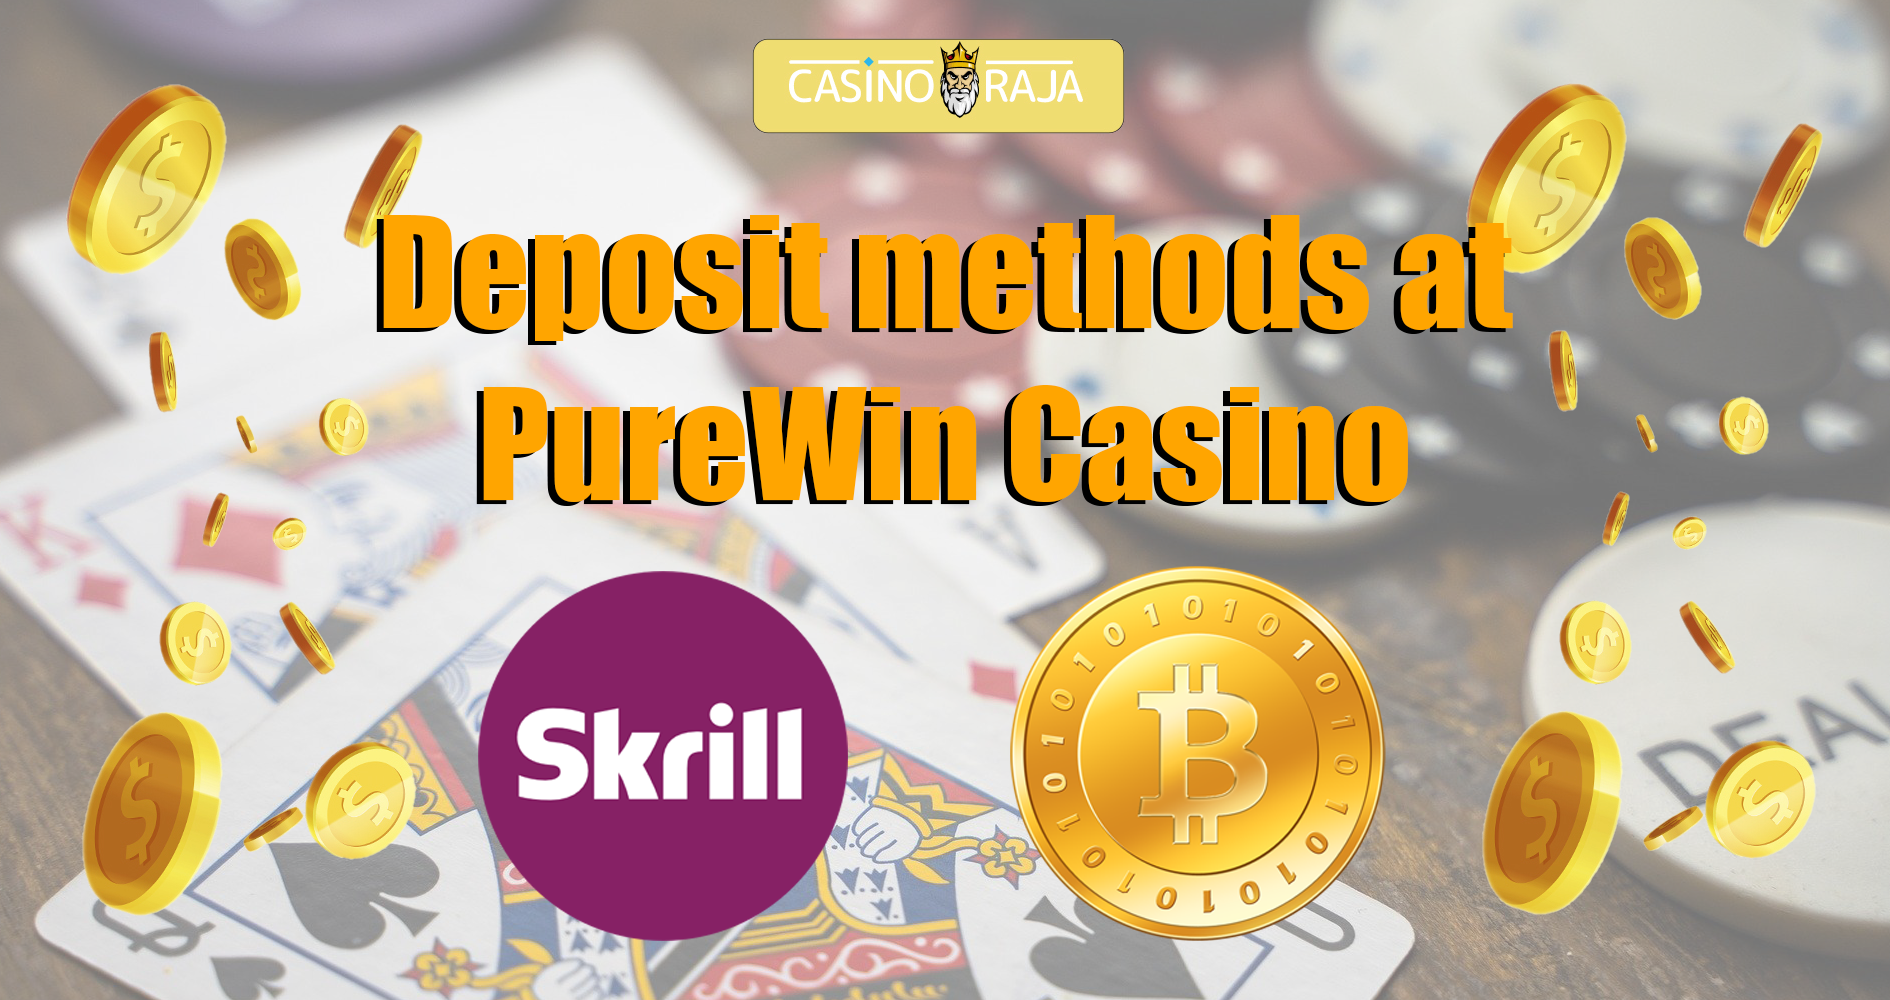 The most profitable deposit methods on the Purewin.